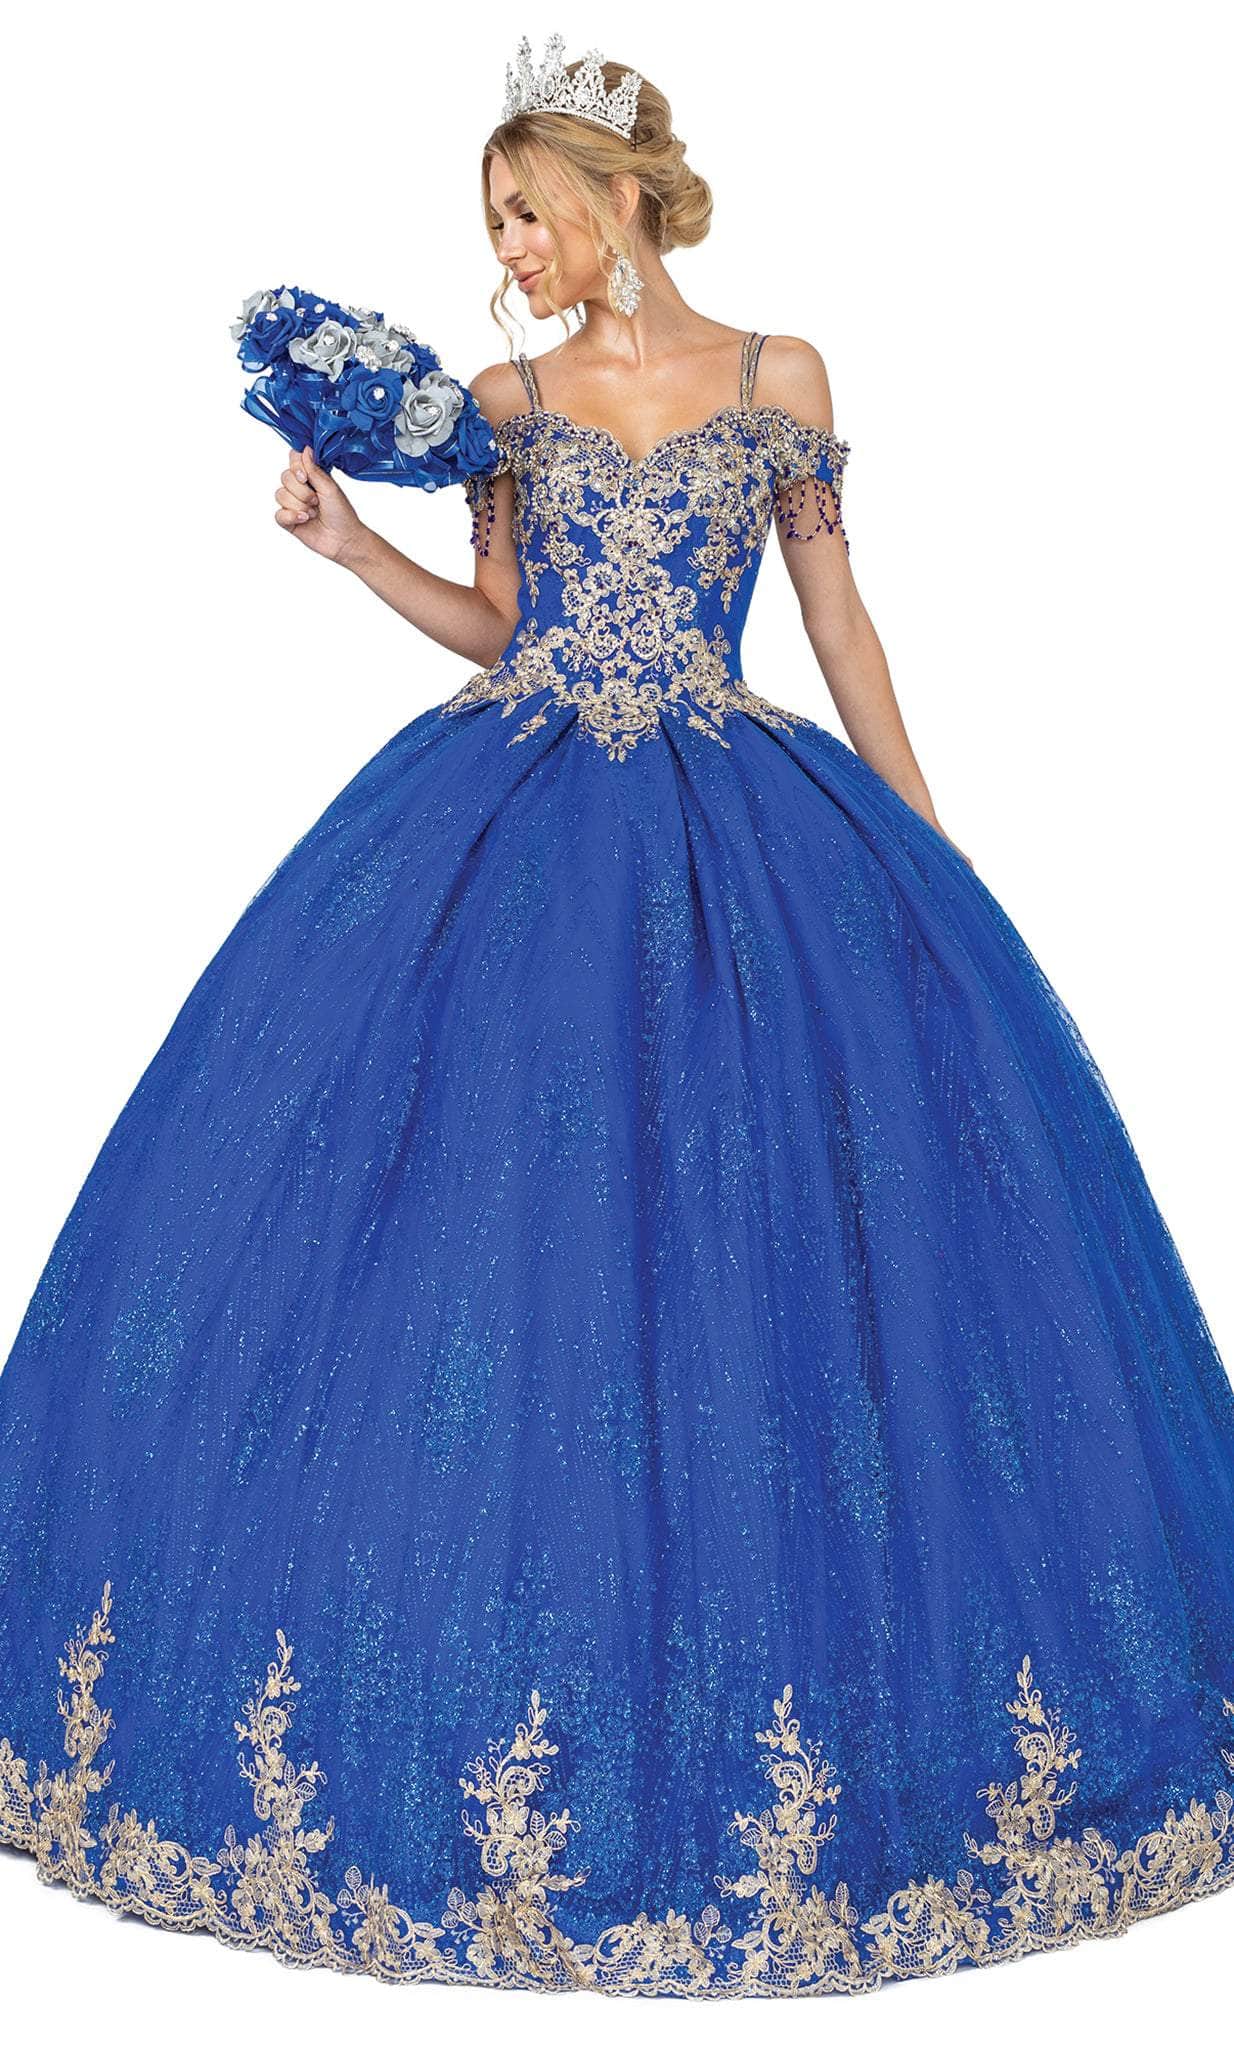 Image of Dancing Queen 1509 - Scalloped Lace Quinceanera Ballgown